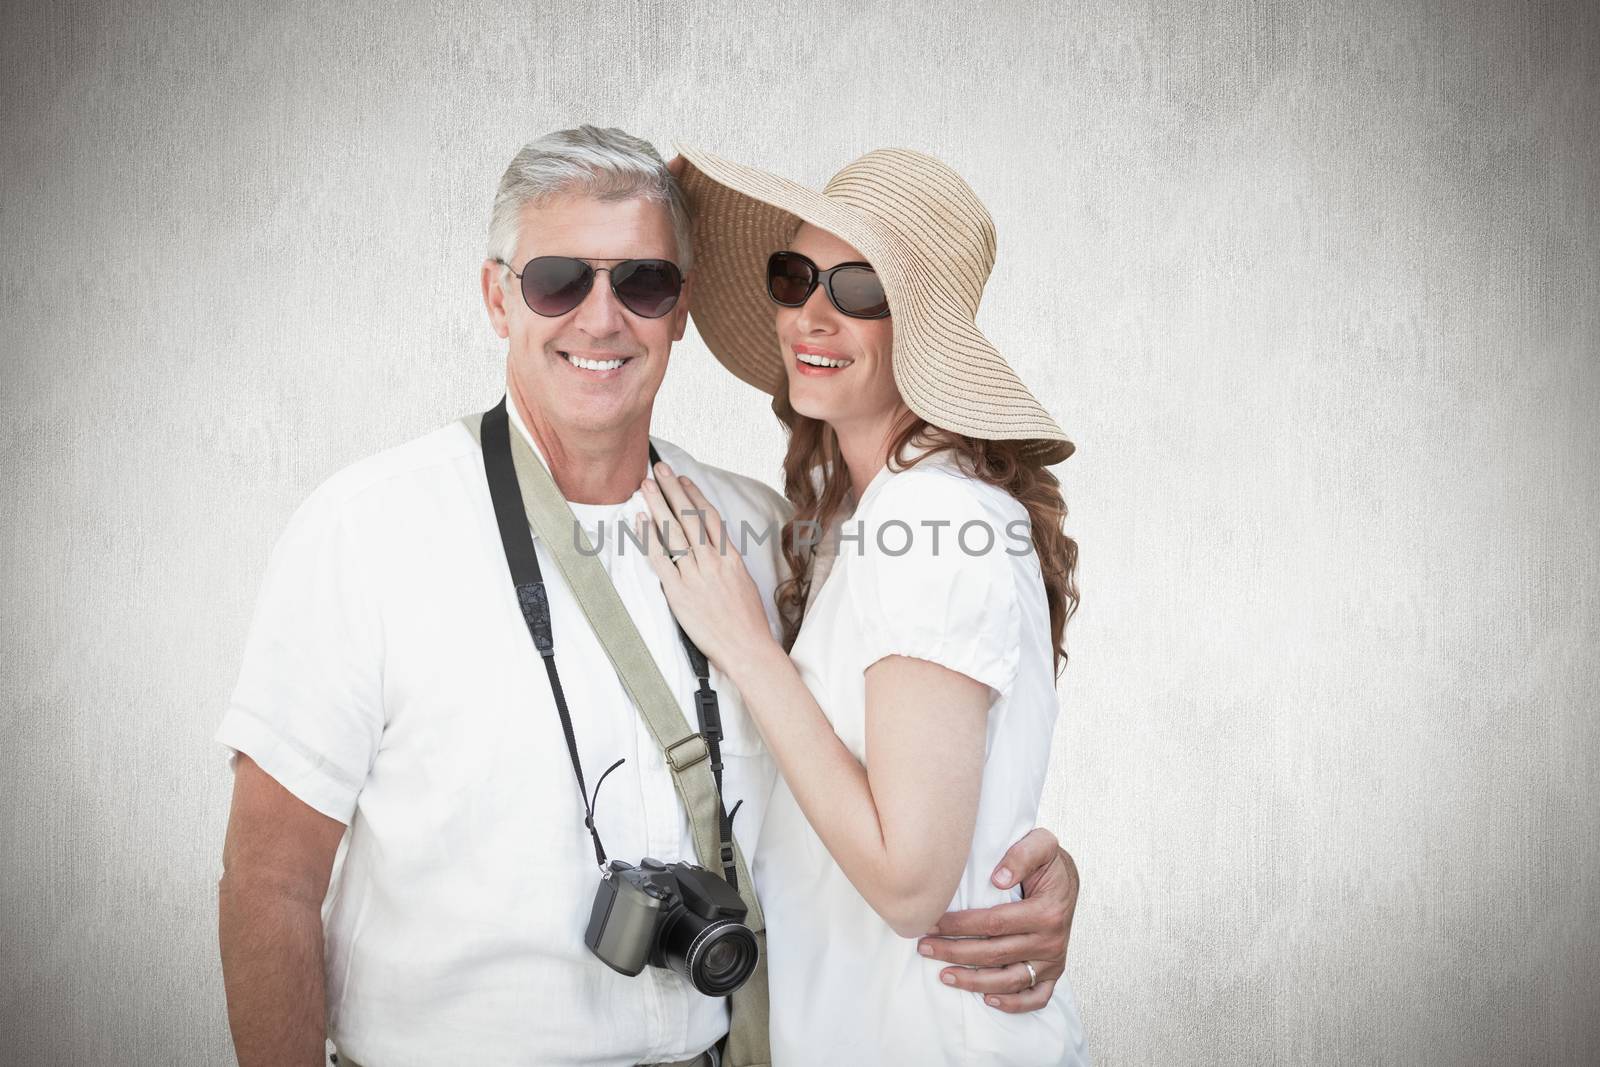 Composite image of vacationing couple by Wavebreakmedia